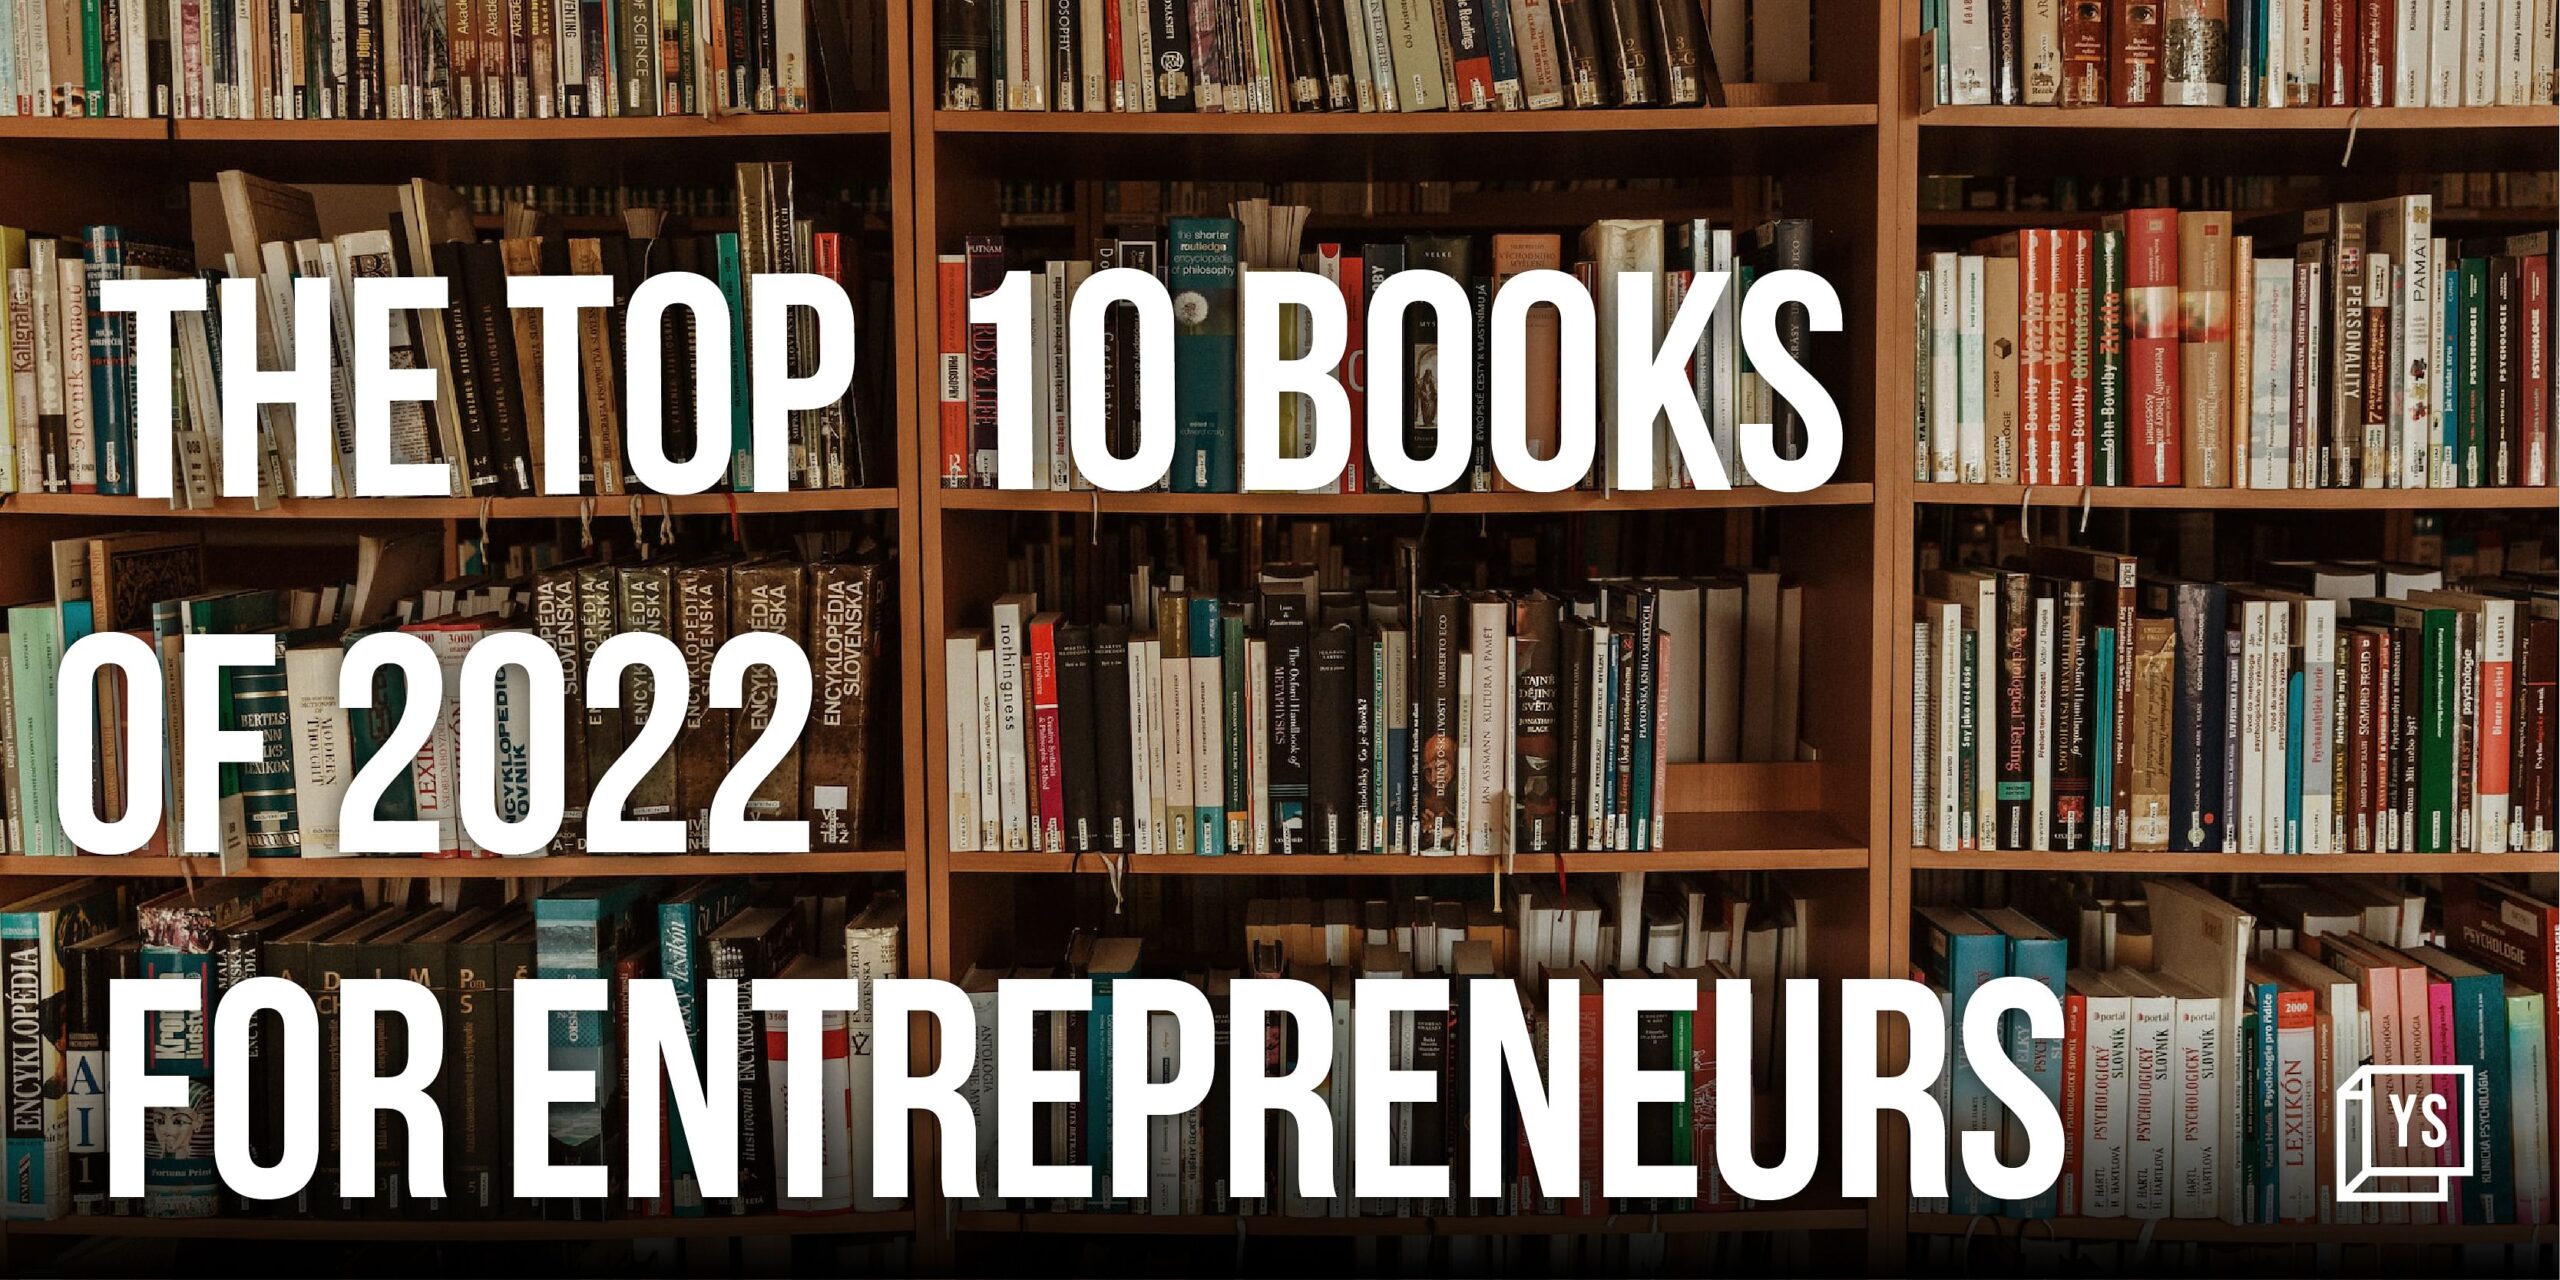 You are currently viewing The top 10 books of 2022 for entrepreneurs